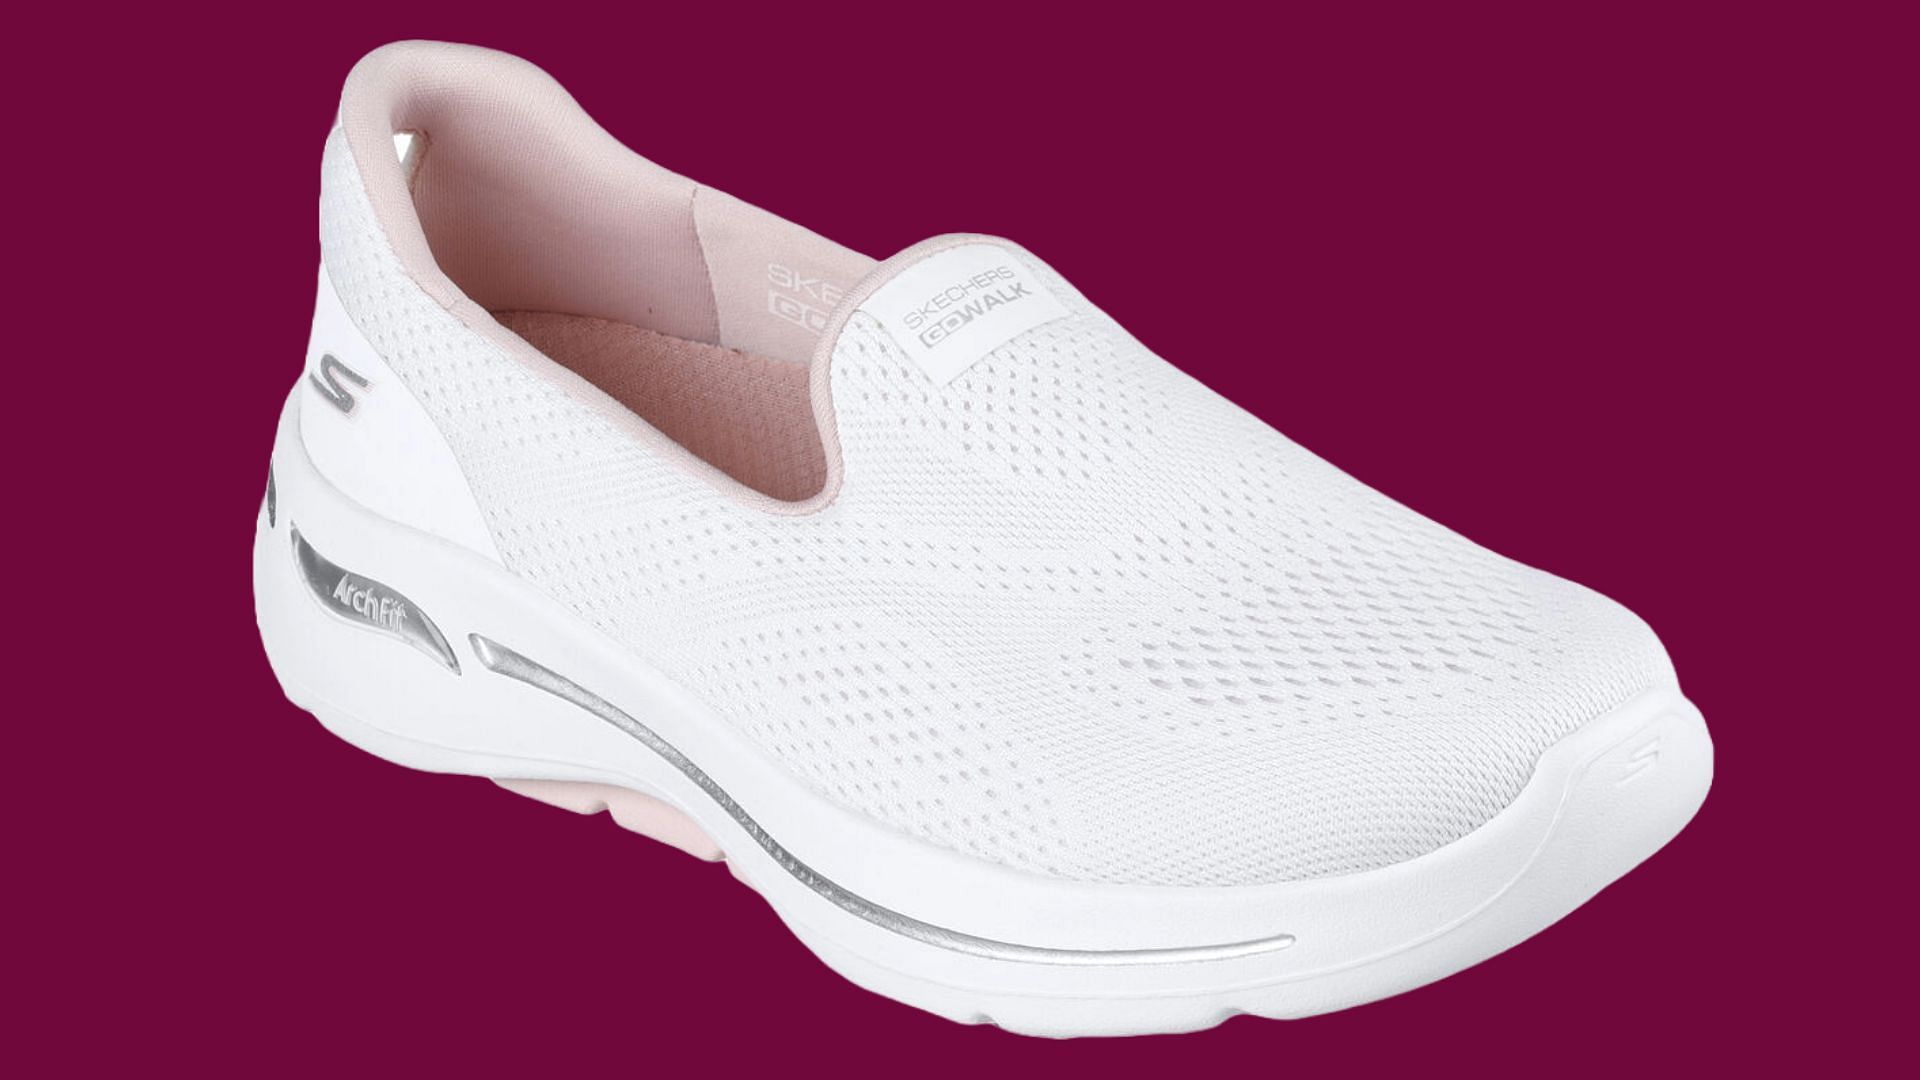 A Closer Look at Go Walk Arch Fit - Imagined (Image via Skechers)